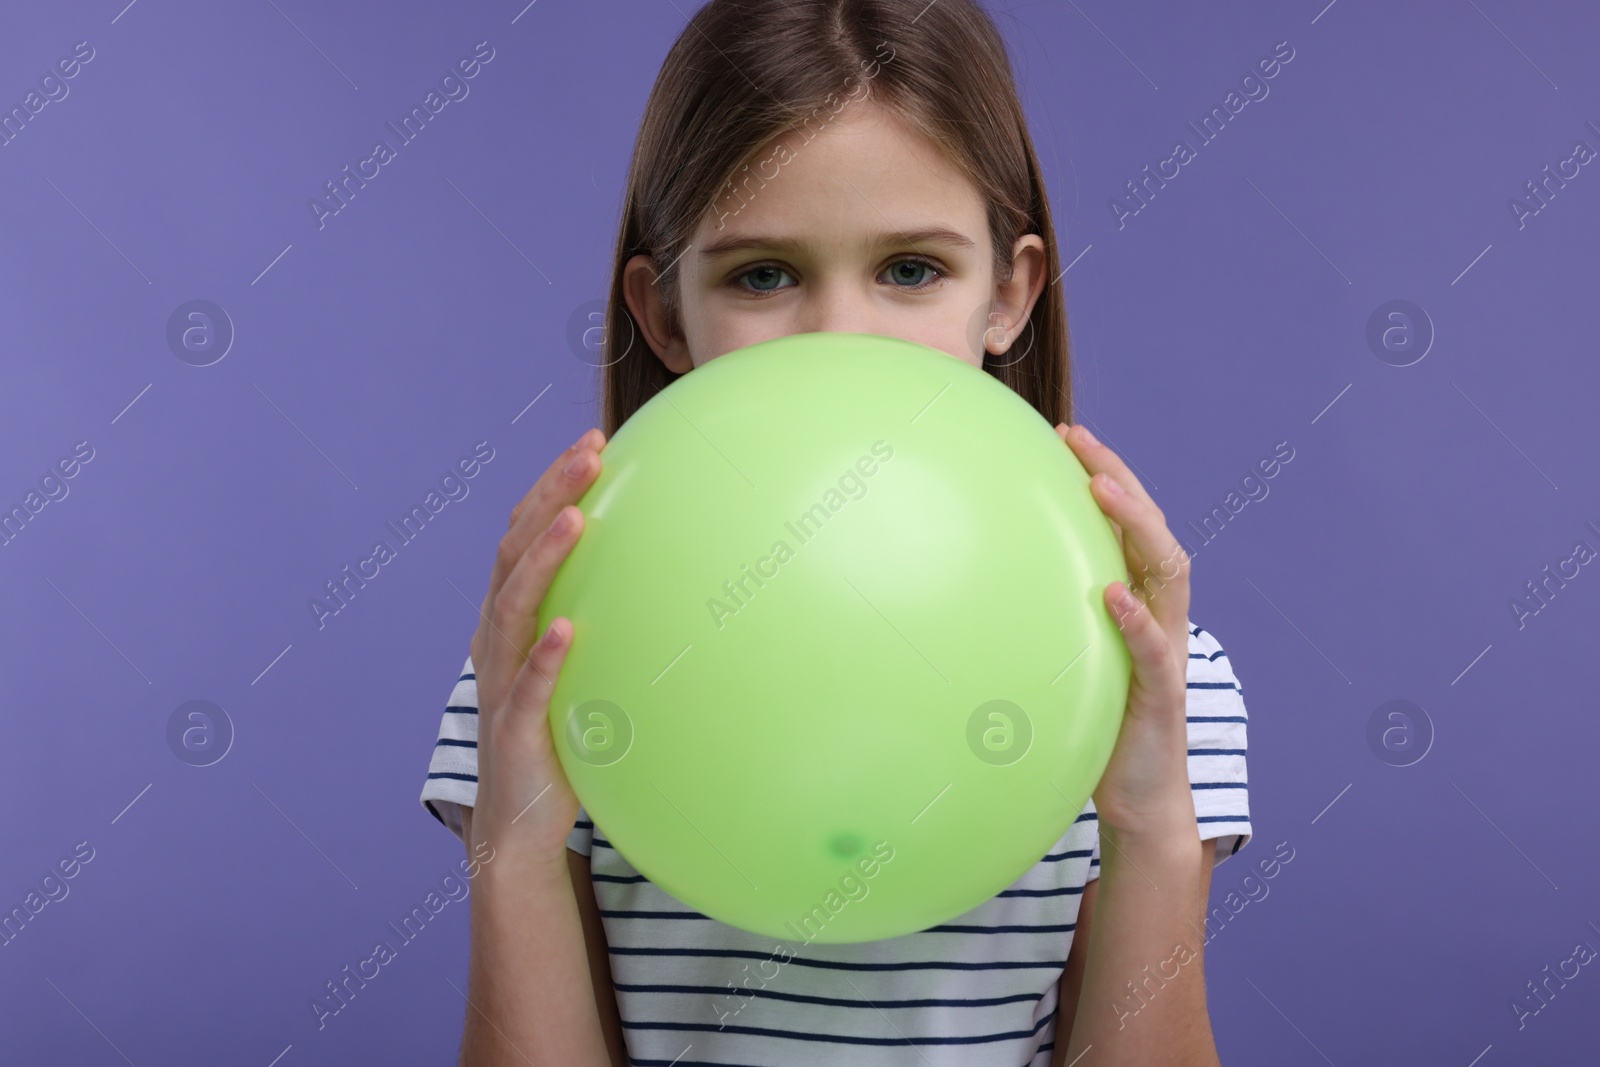 Photo of Girl inflating light green balloon on violet background